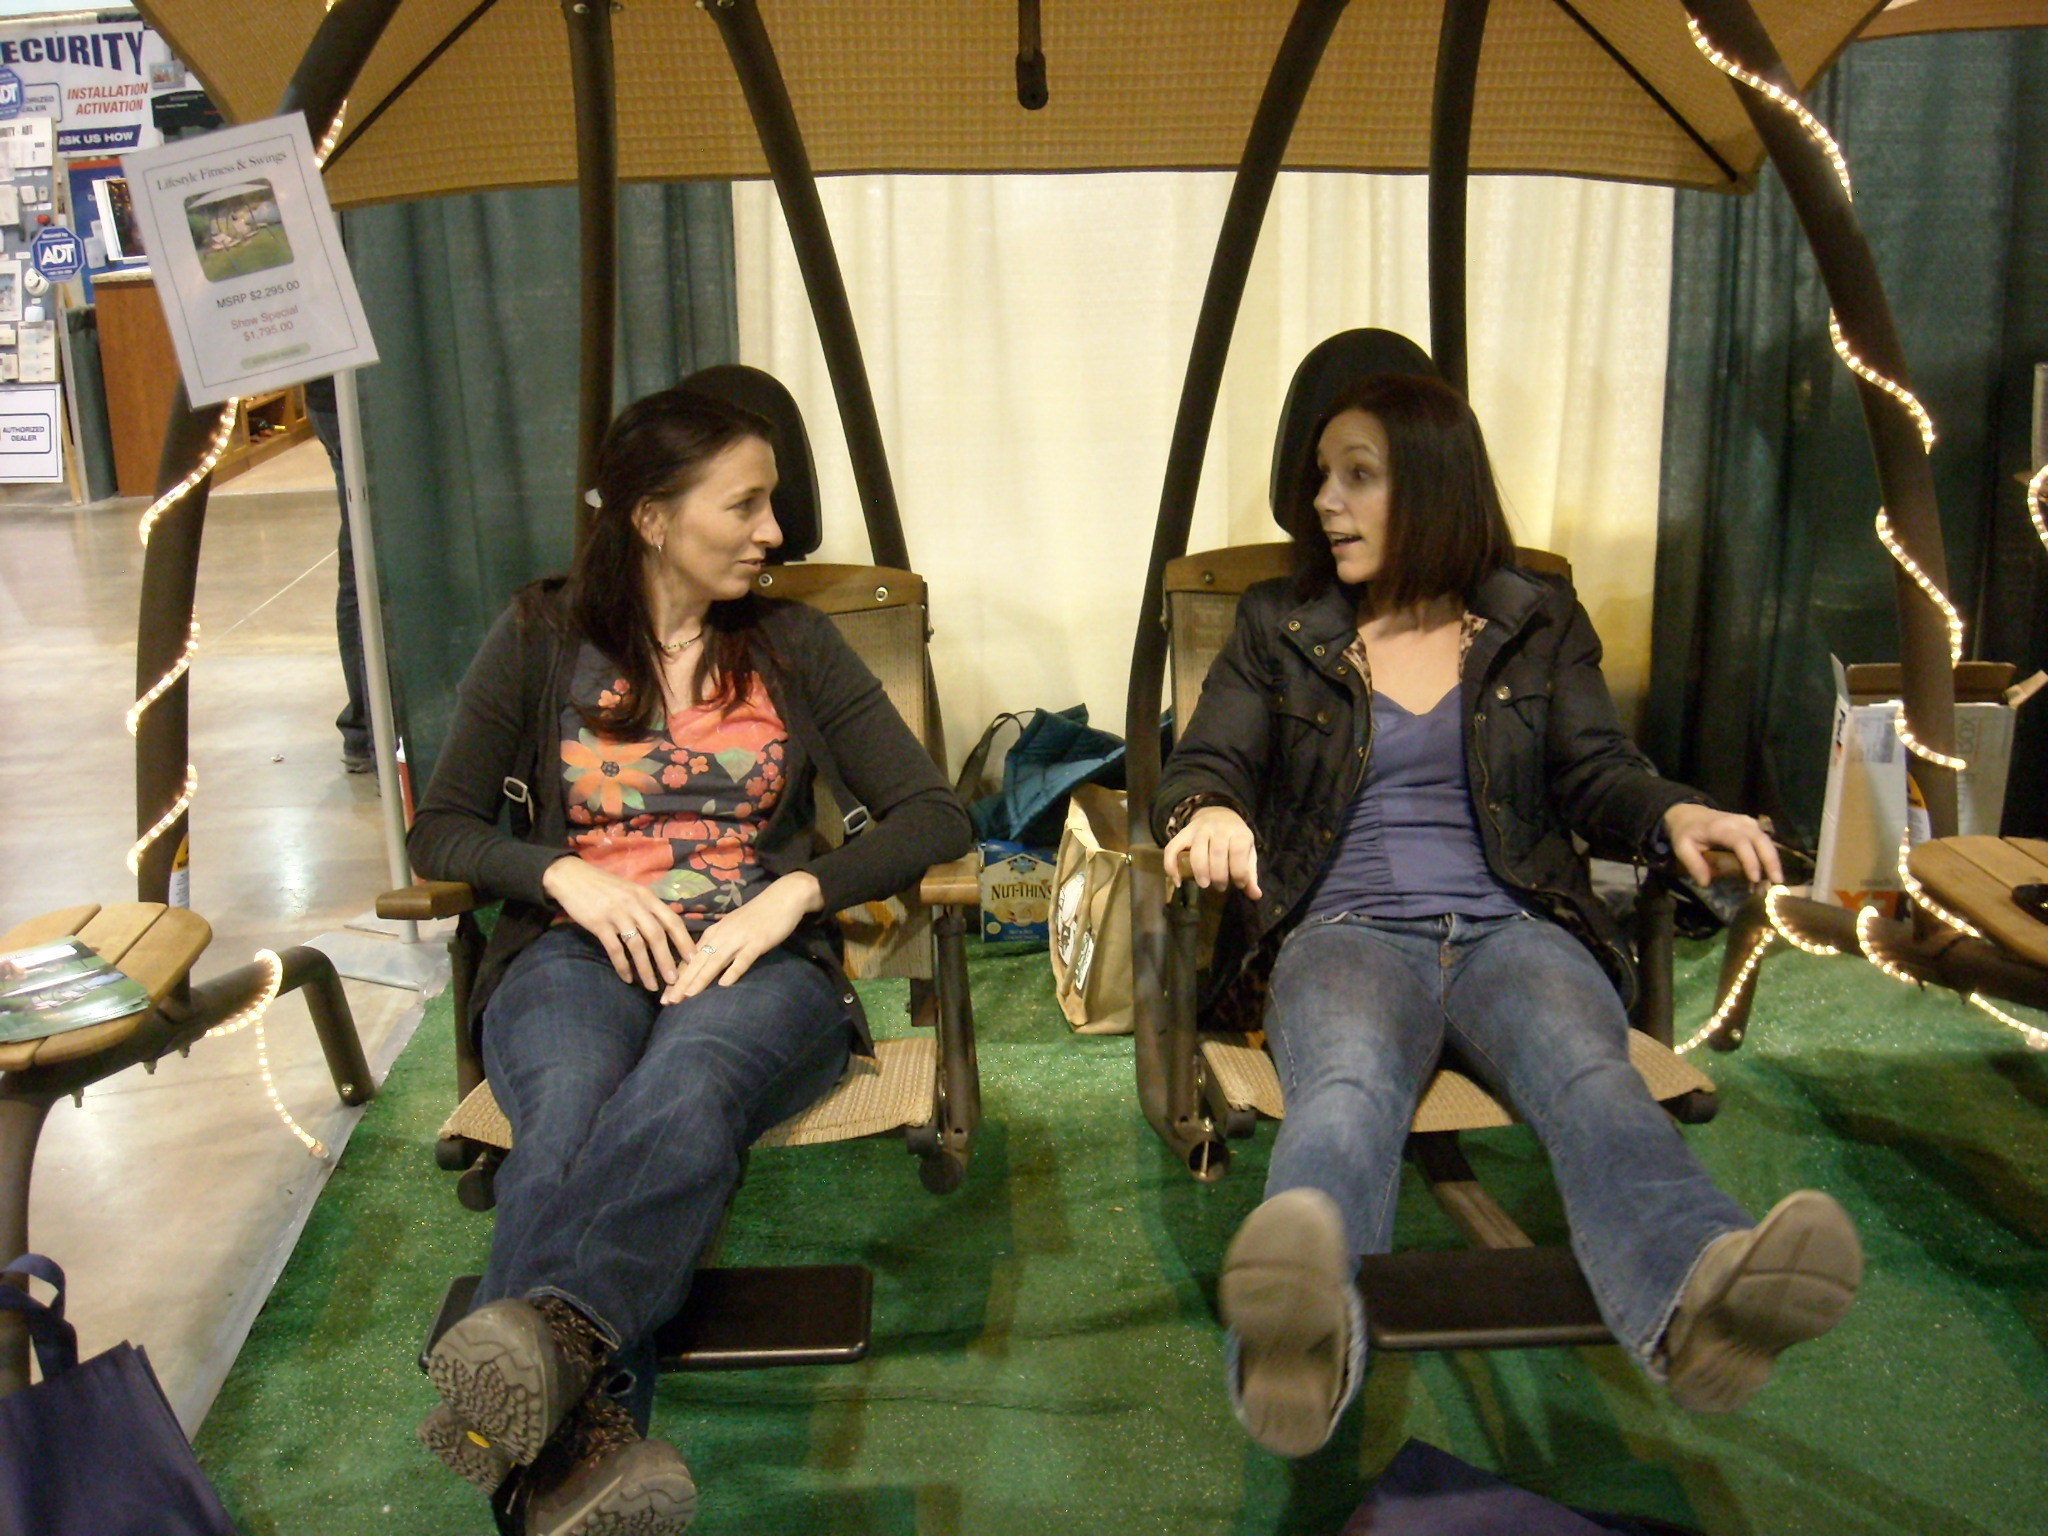 Tori and Lisa relaxing on a $4000 patio swing set.